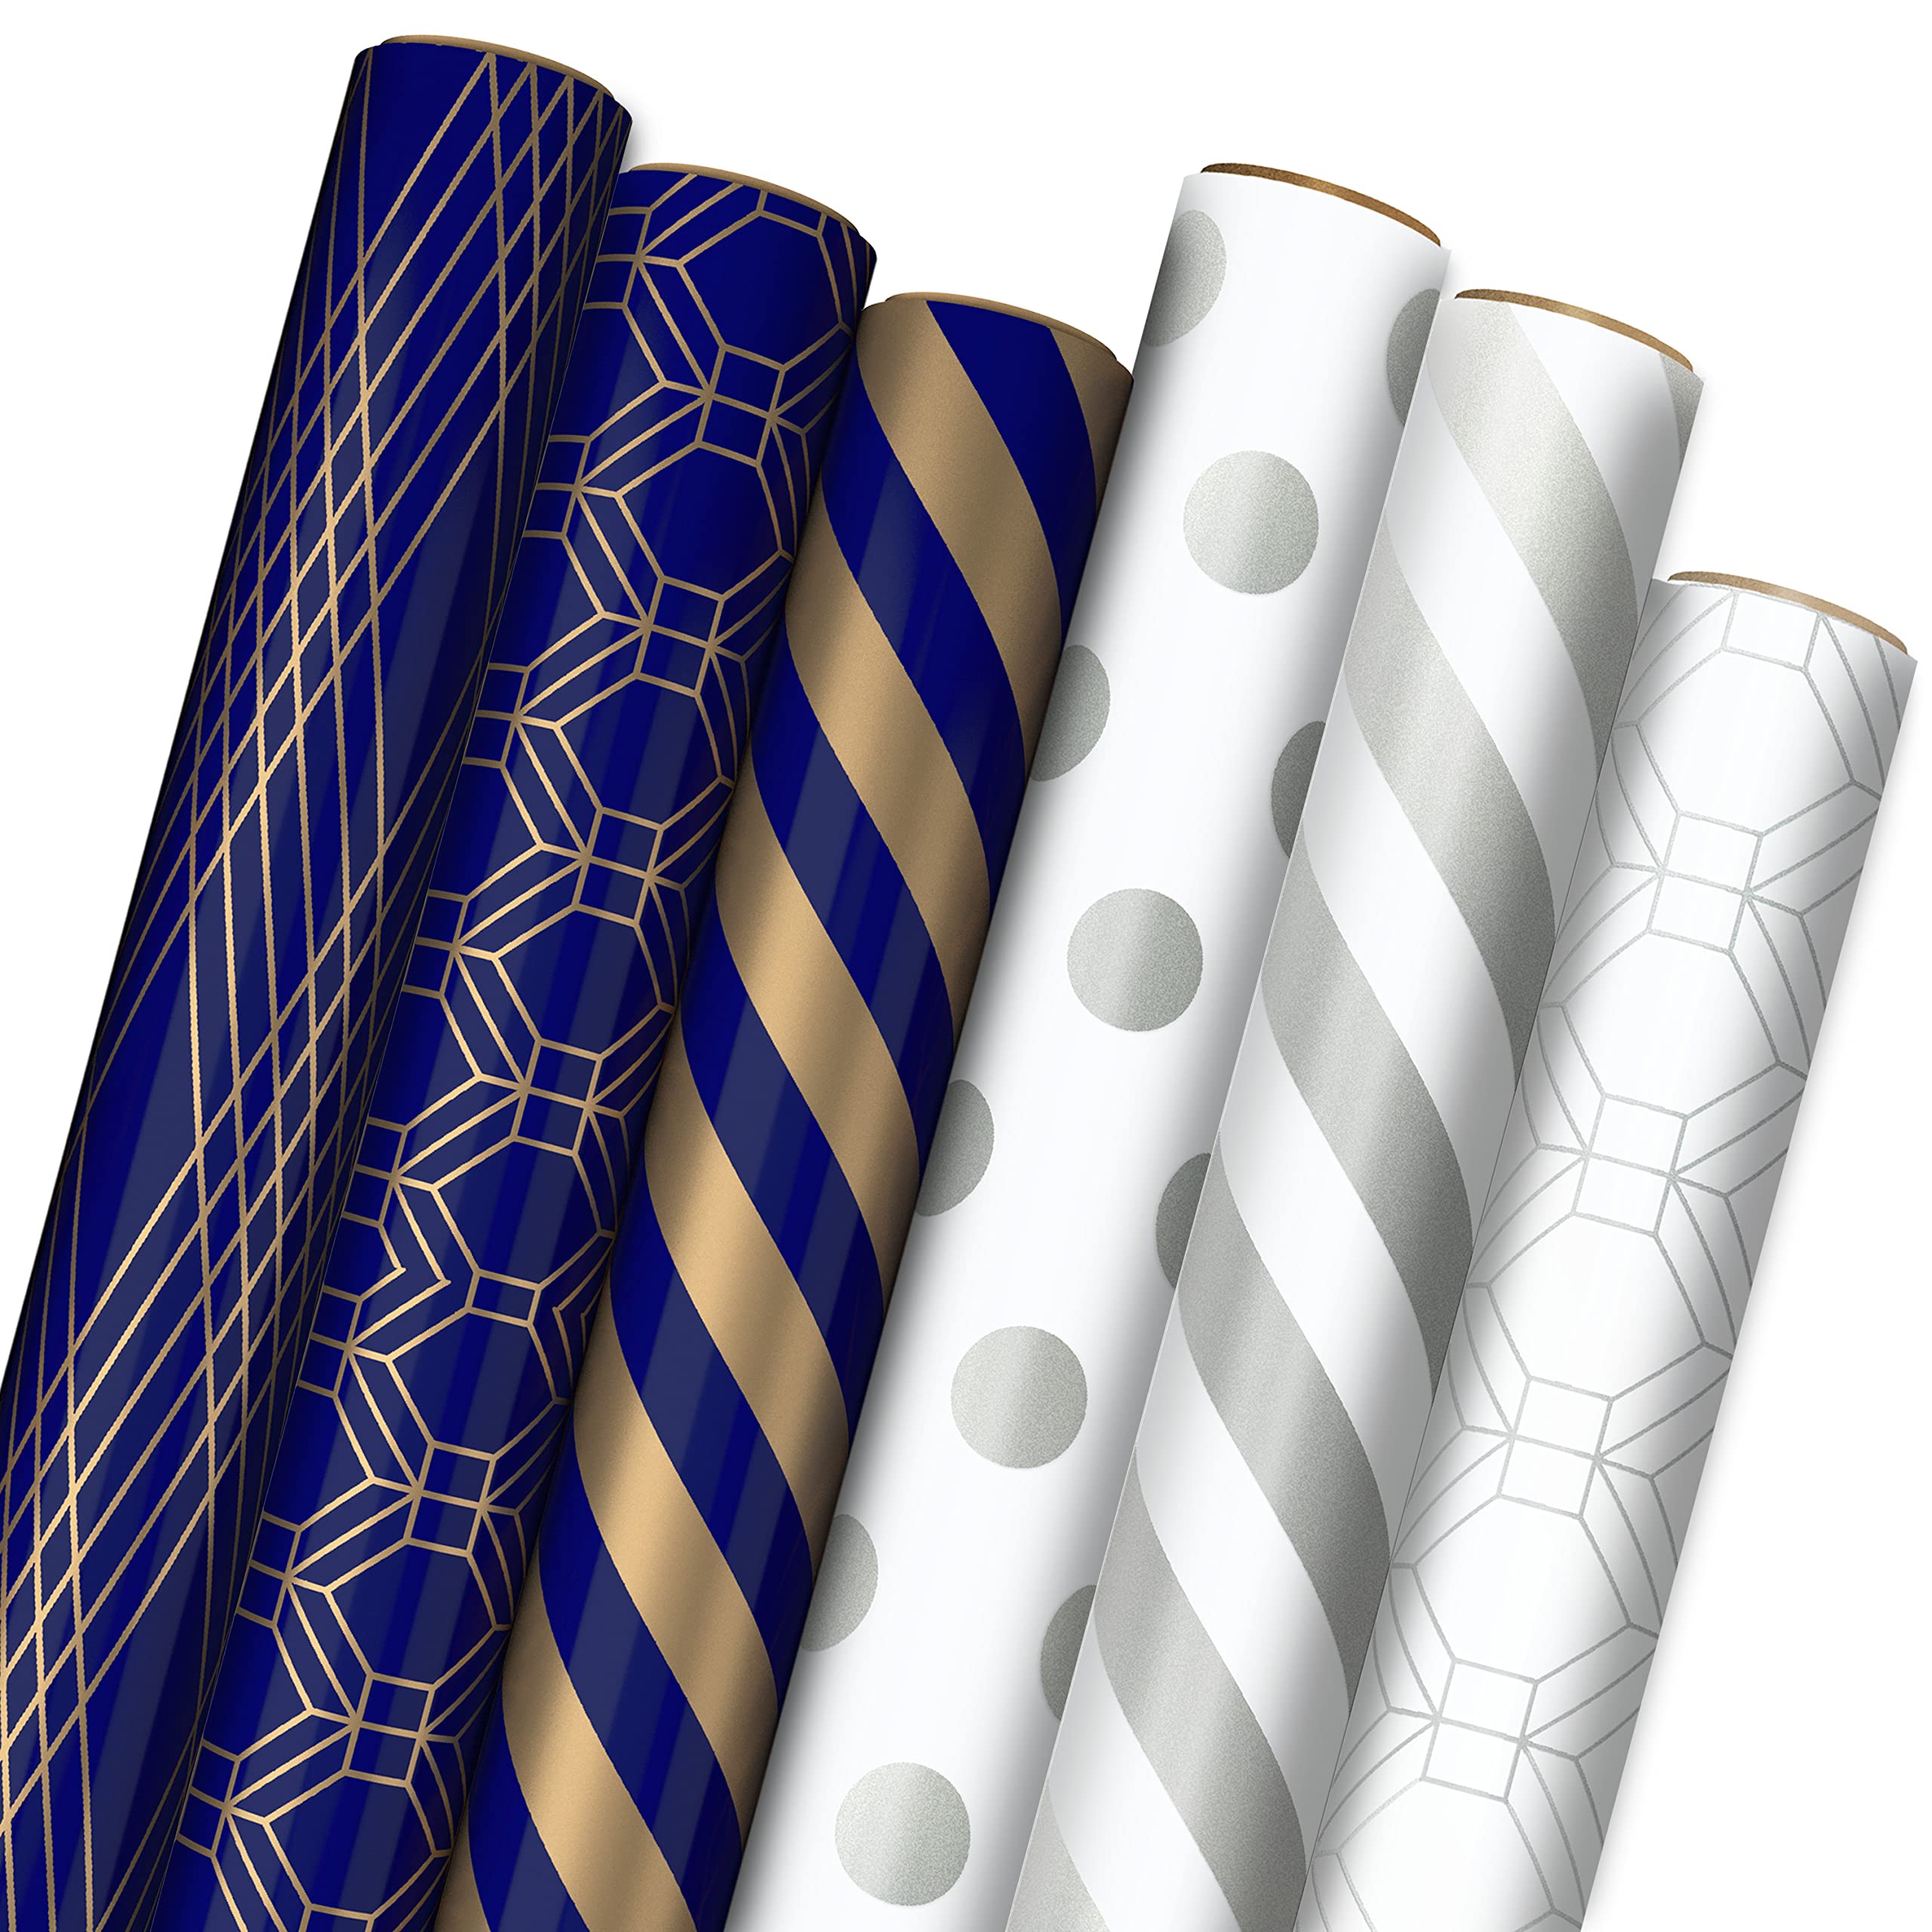 Hallmark Metallic Wrapping Paper Bundle with Cutlines on Reverse (6 Rolls: 210 Square Feet Total) Navy, Gold, Silver and White for Birthdays, Weddings, Graduations, Hanukkah, Christmas